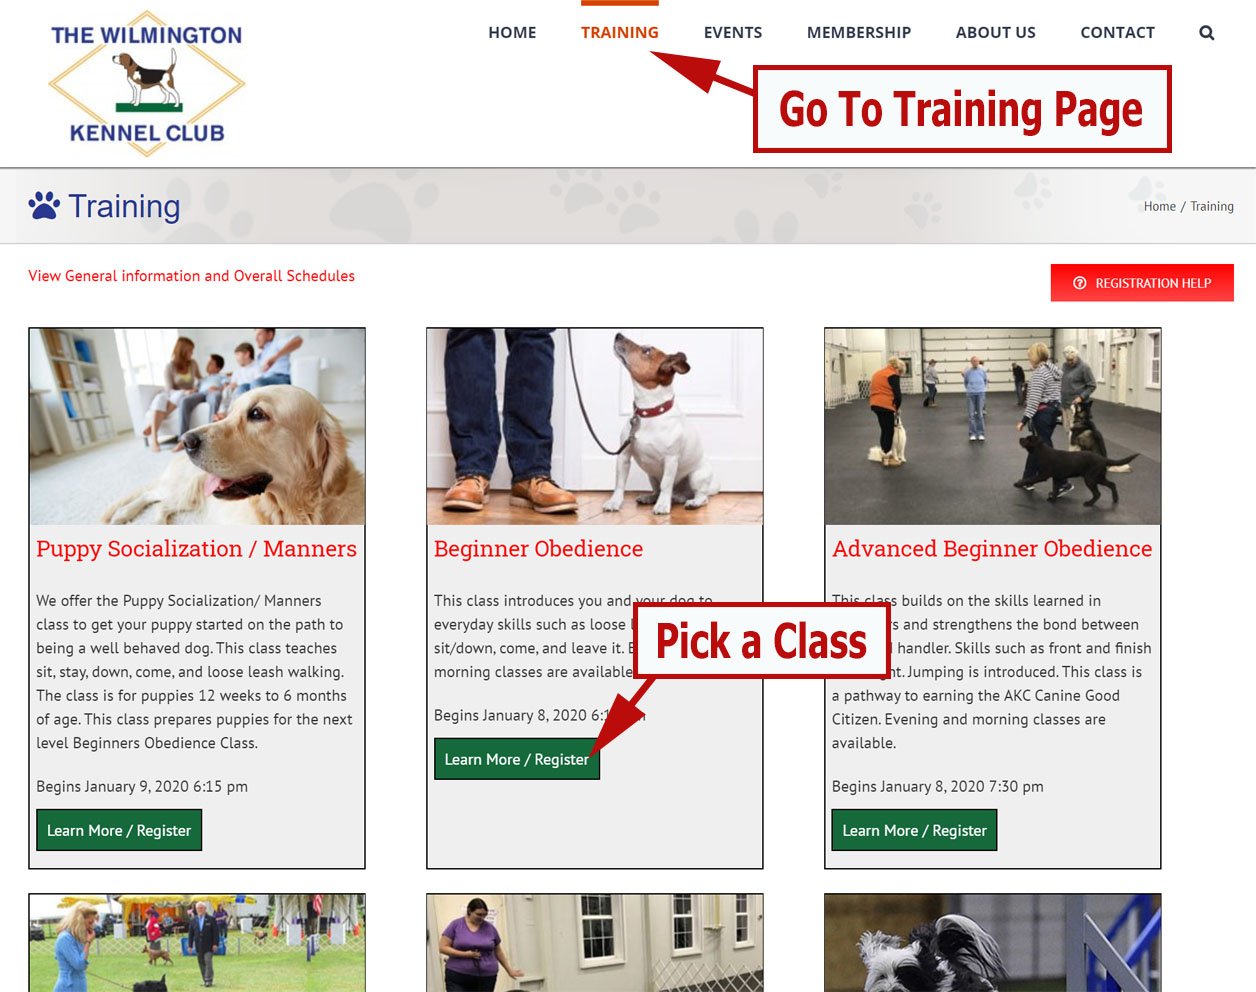 Screenshot with arrows pointing to the Training menu item and the Learn More button for a class